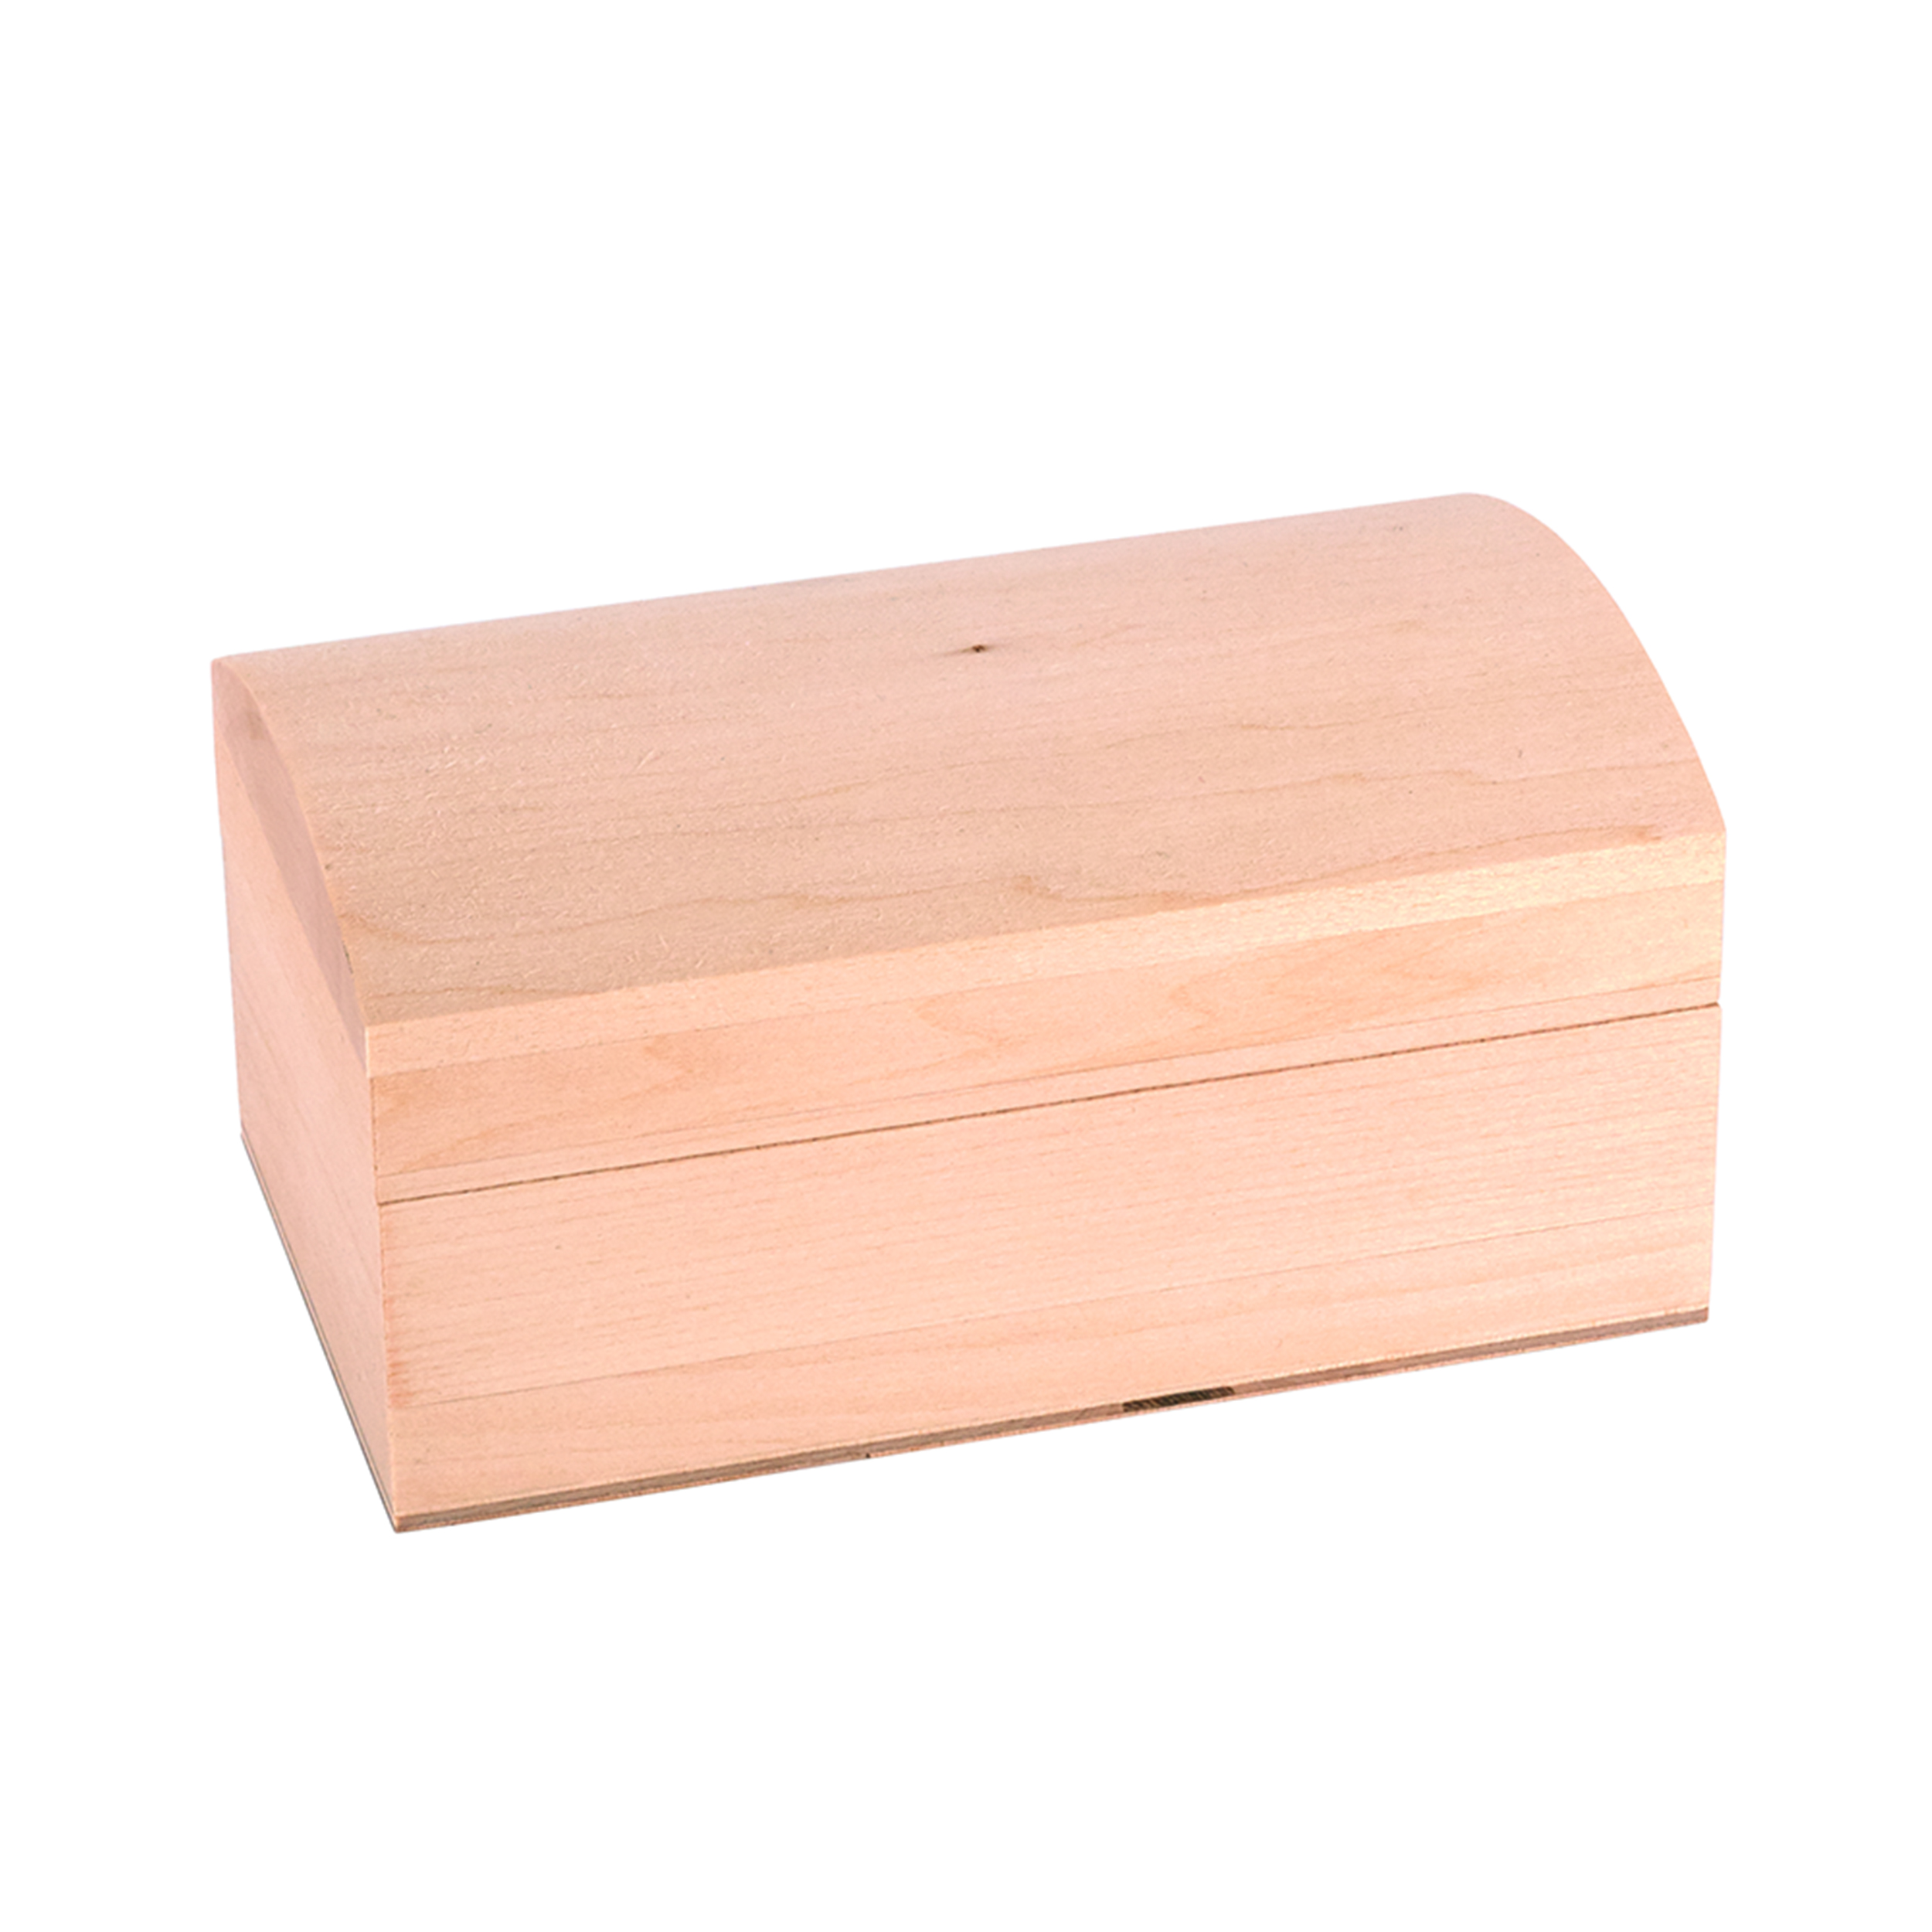 Walnut Hollow Rounded Trunk Box 3.06in X 6.08in X 3.75in